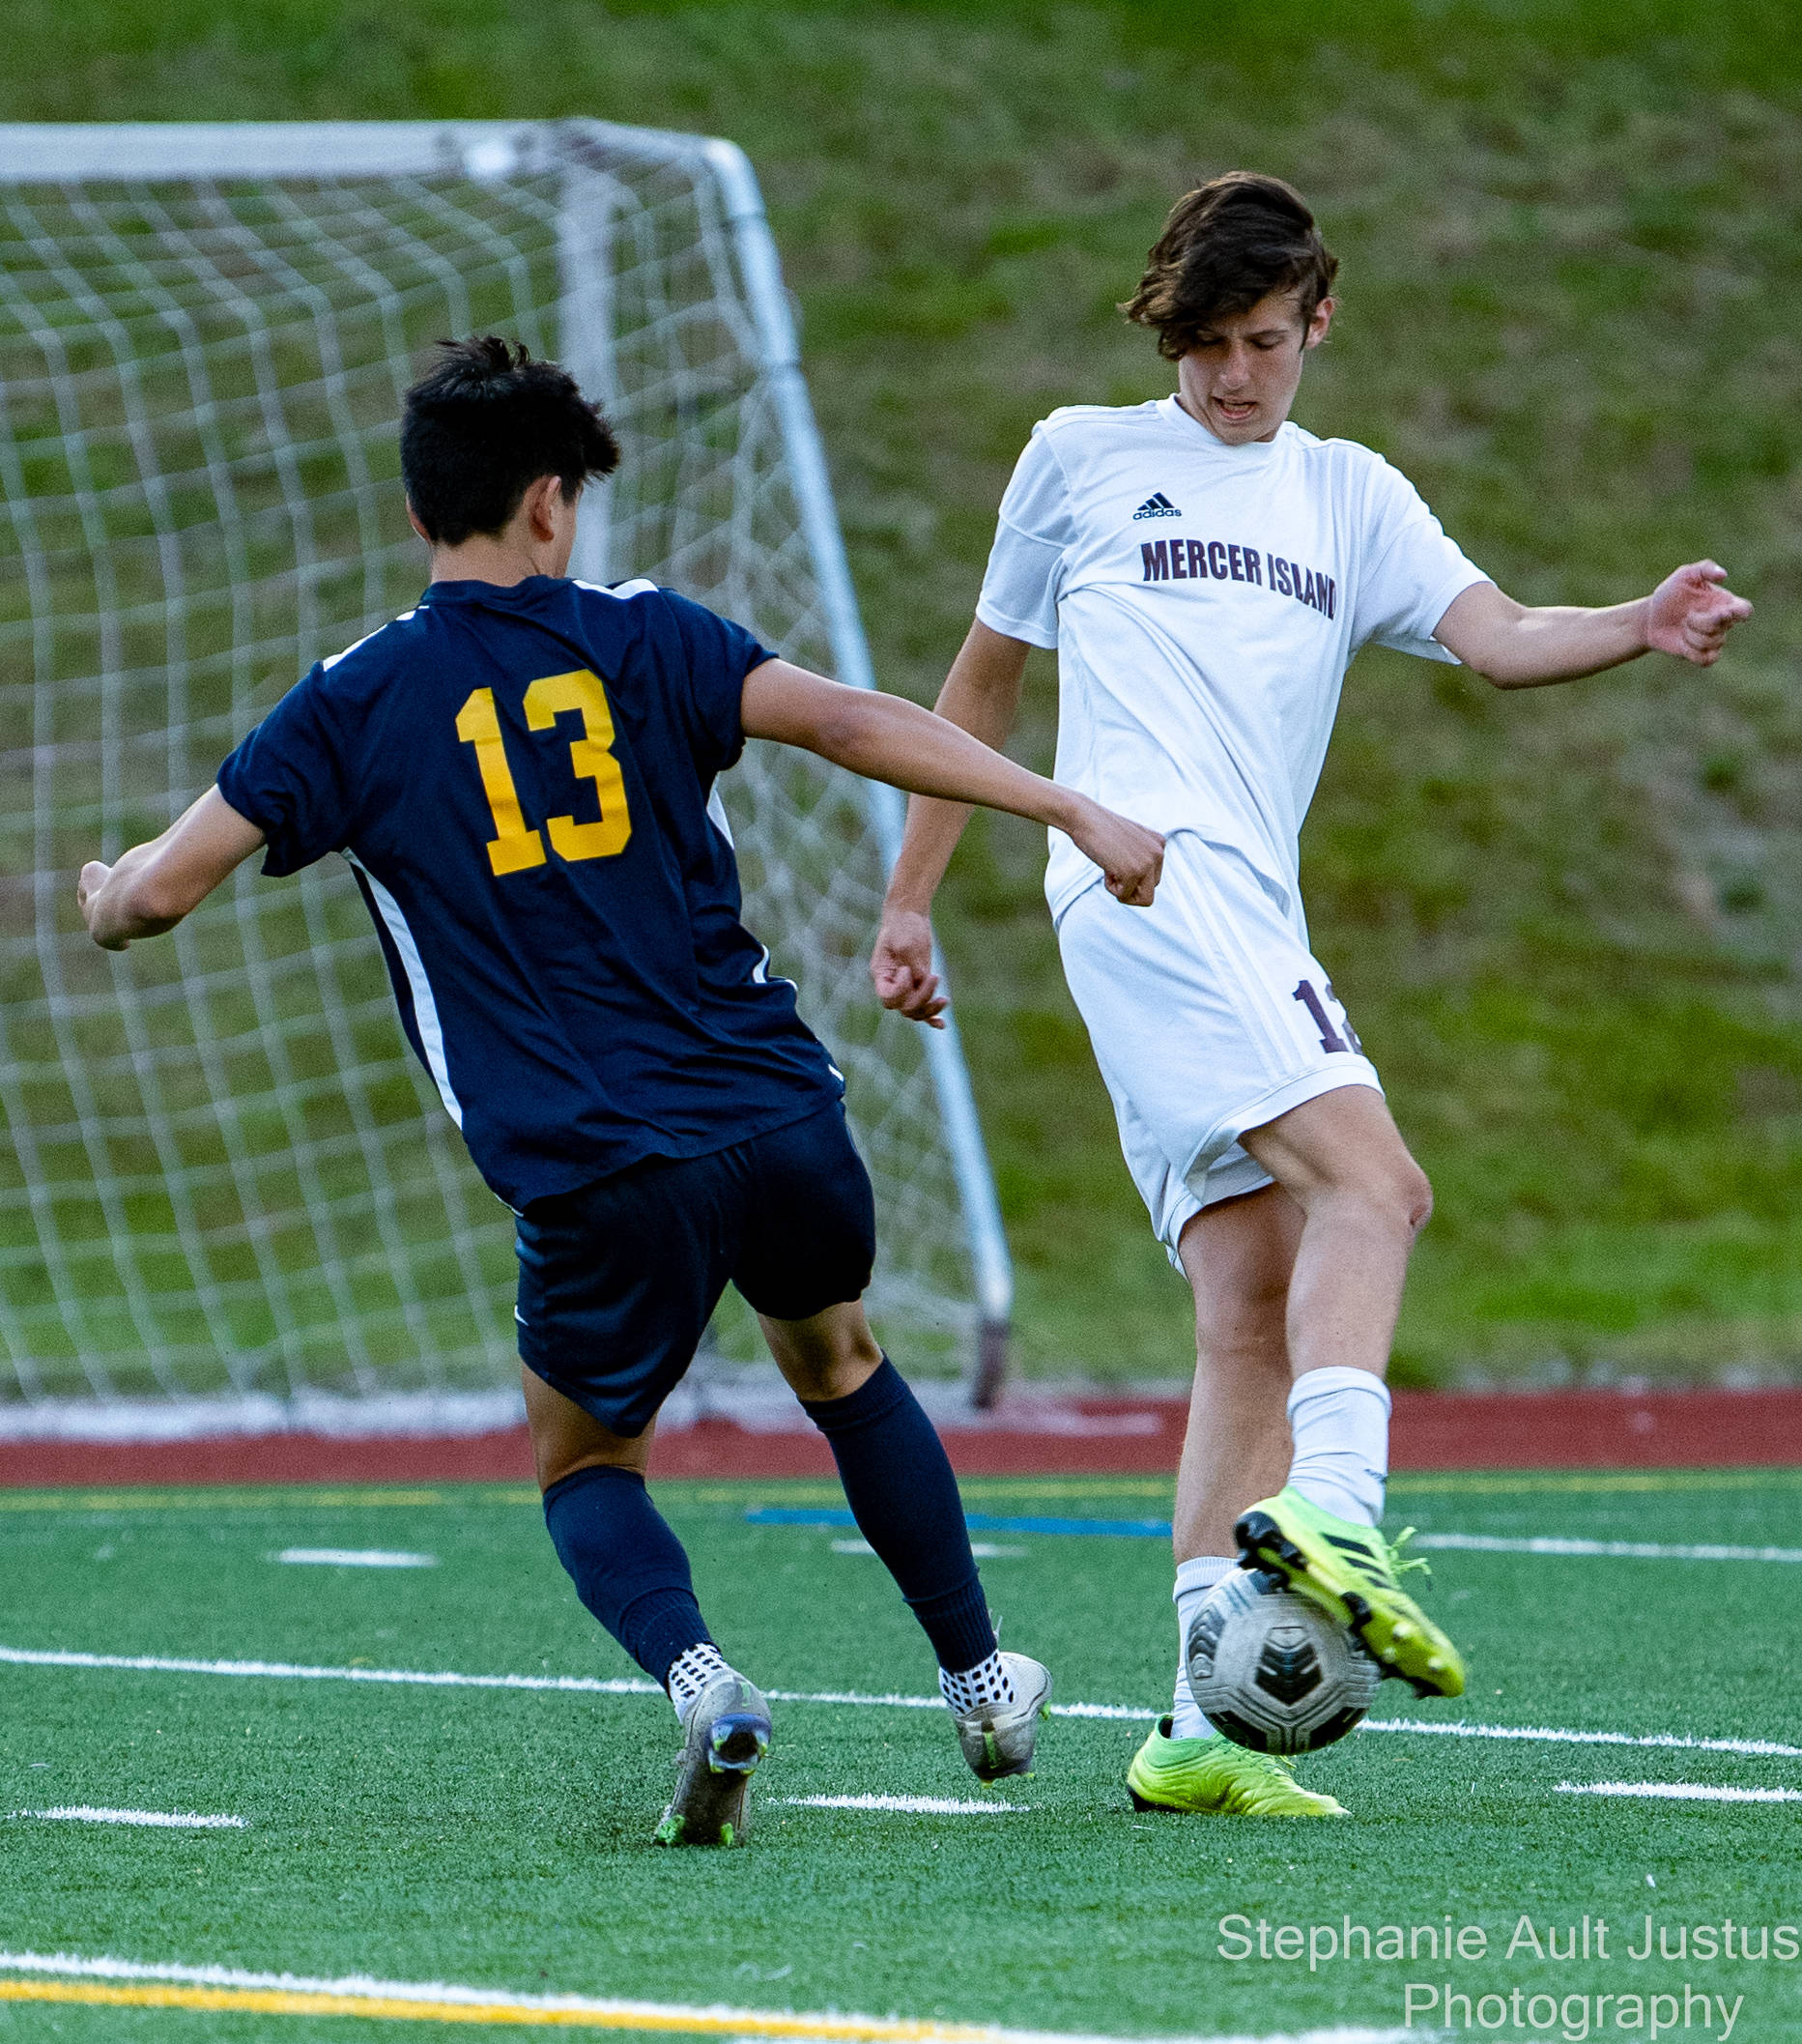 Mercer Island’s Brady Gilroy battles Bellevue’s Jake Chung for the ball in a June 3 match. Mercer Island won, 3-0, on goals from Gilroy, Alec Willet and Tripp White. Photo courtesy of Stephanie Ault Justus